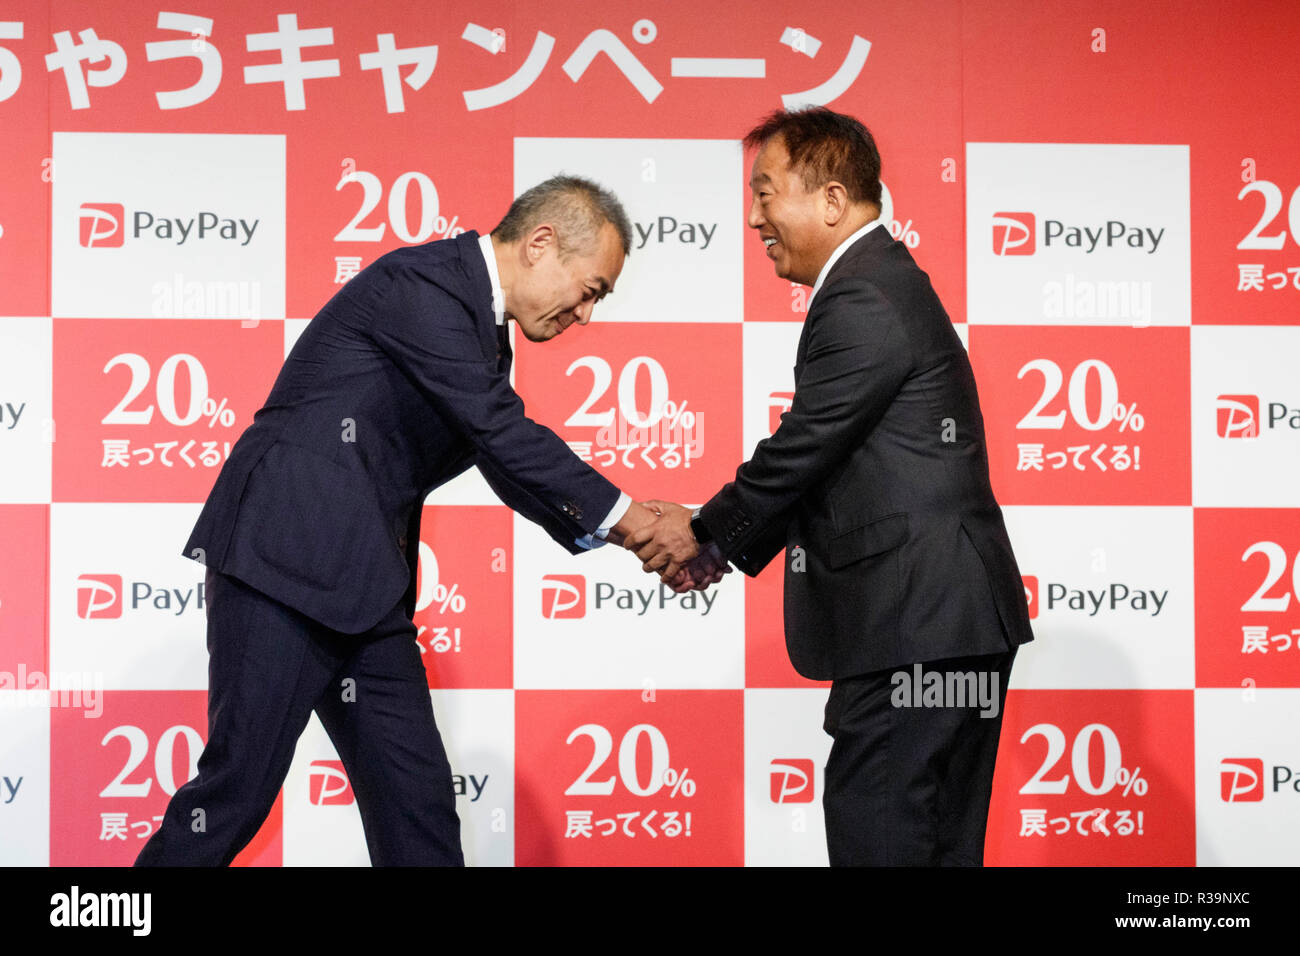 (L to R) Ichiro Nakayama, president and CEO of PayPay Corp. shake hands with Jun Shimba representative director and COO of SoftBank Corp., during a news conference to announce the new smartphone payment service ''PayPay'' on November 22, 2018, Tokyo, Japan. PayPay is a smartphone payment service using barcodes (QR codes) supported by SoftBank, Yahoo Japan and Paytm, that can be used in Japanese stores including Bic Camera, Yamada Denki and Family Mart. Credit: Rodrigo Reyes Marin/AFLO/Alamy Live News Stock Photo